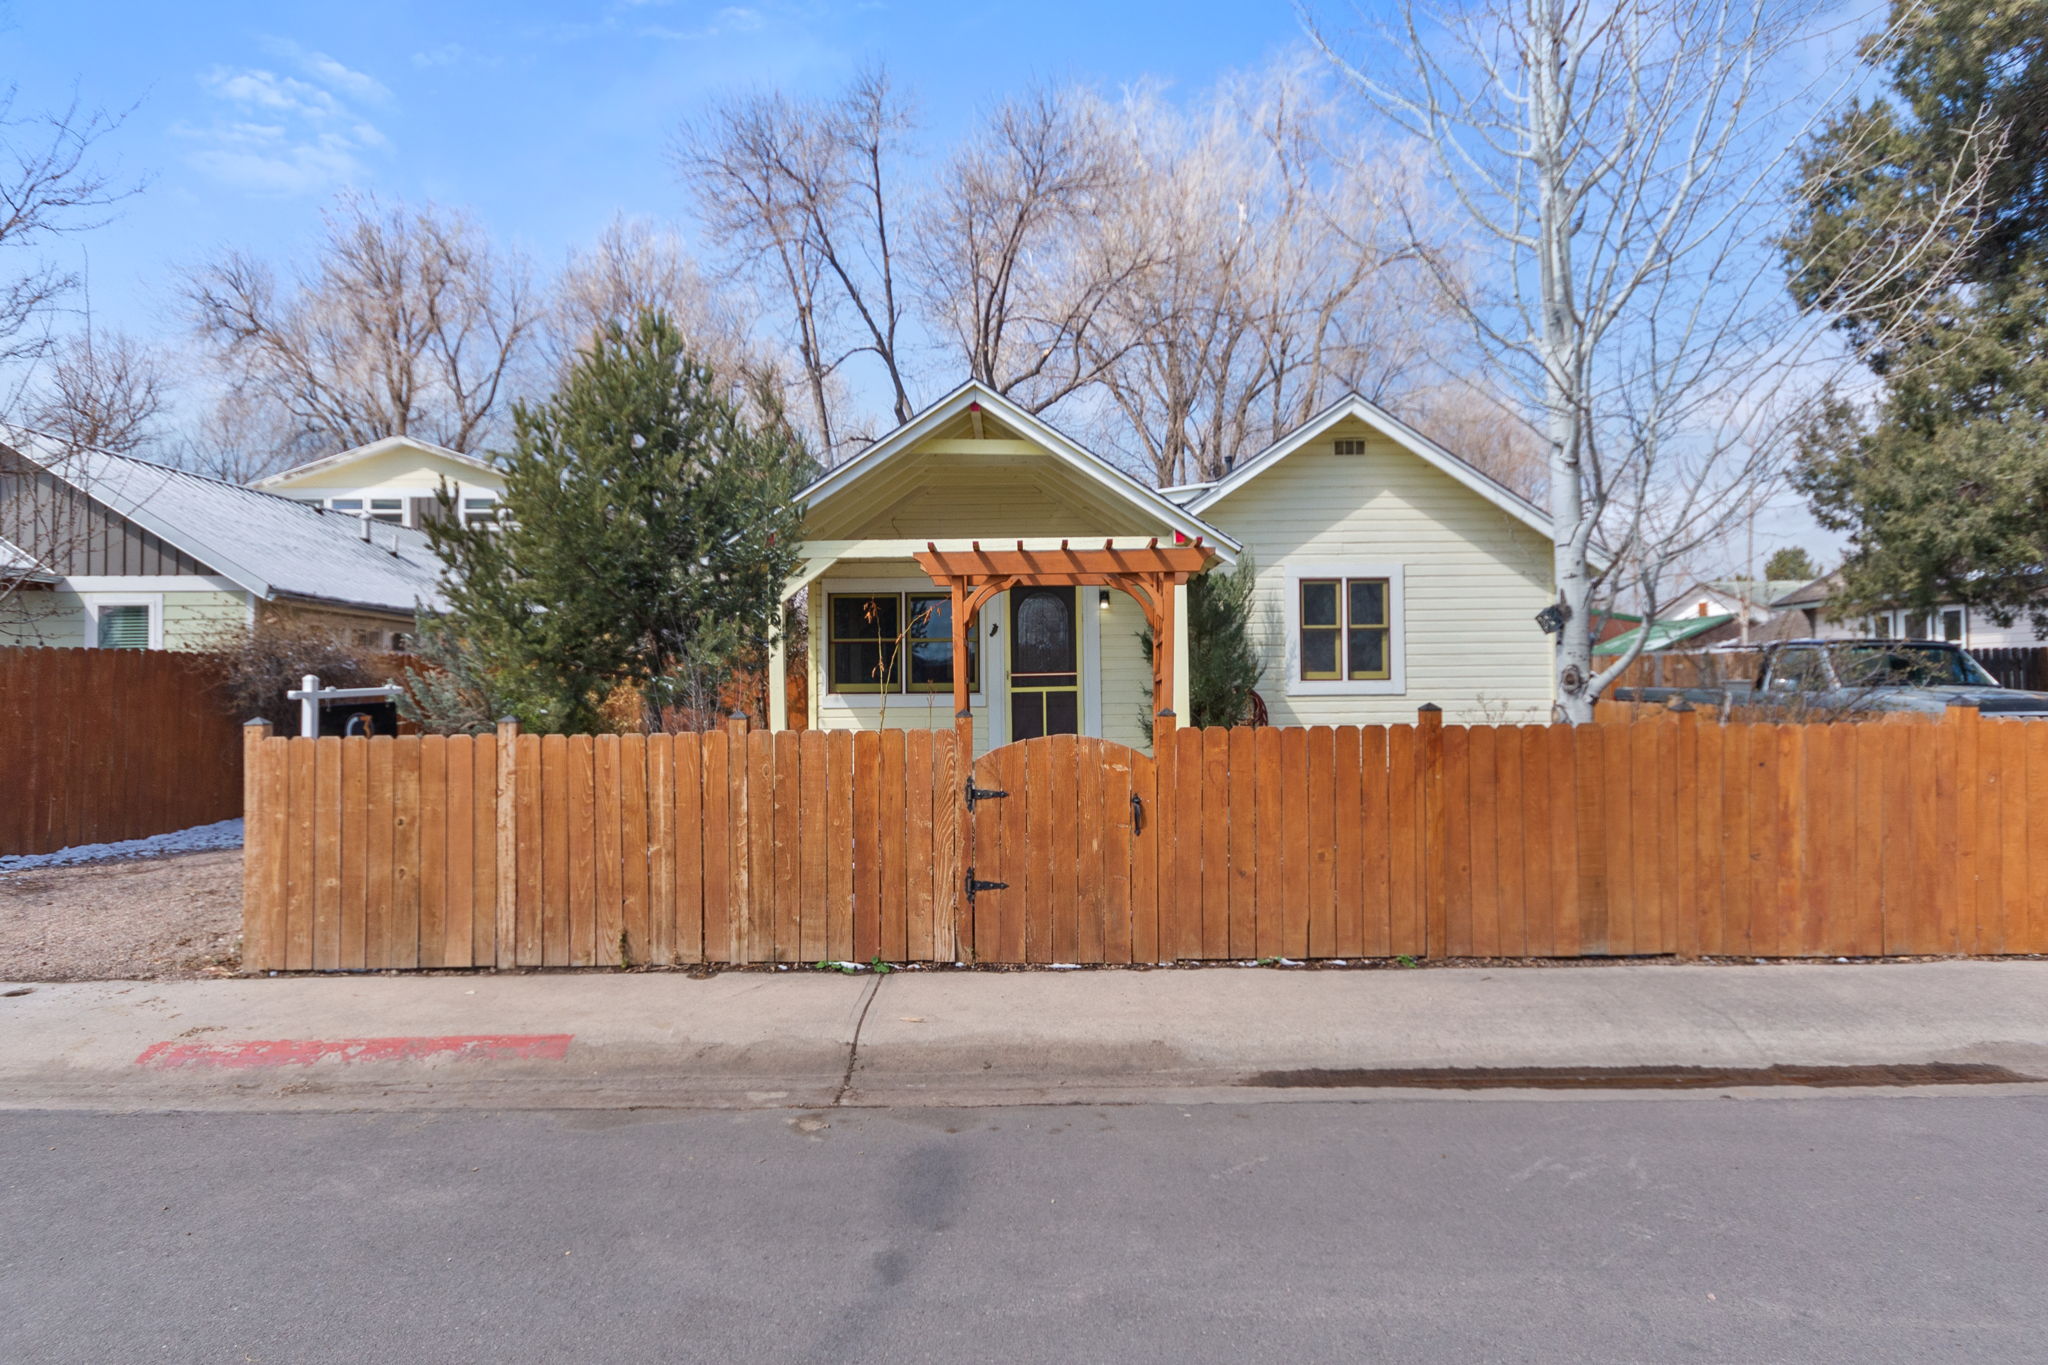  125 3rd St, Fort Collins, CO 80524, US